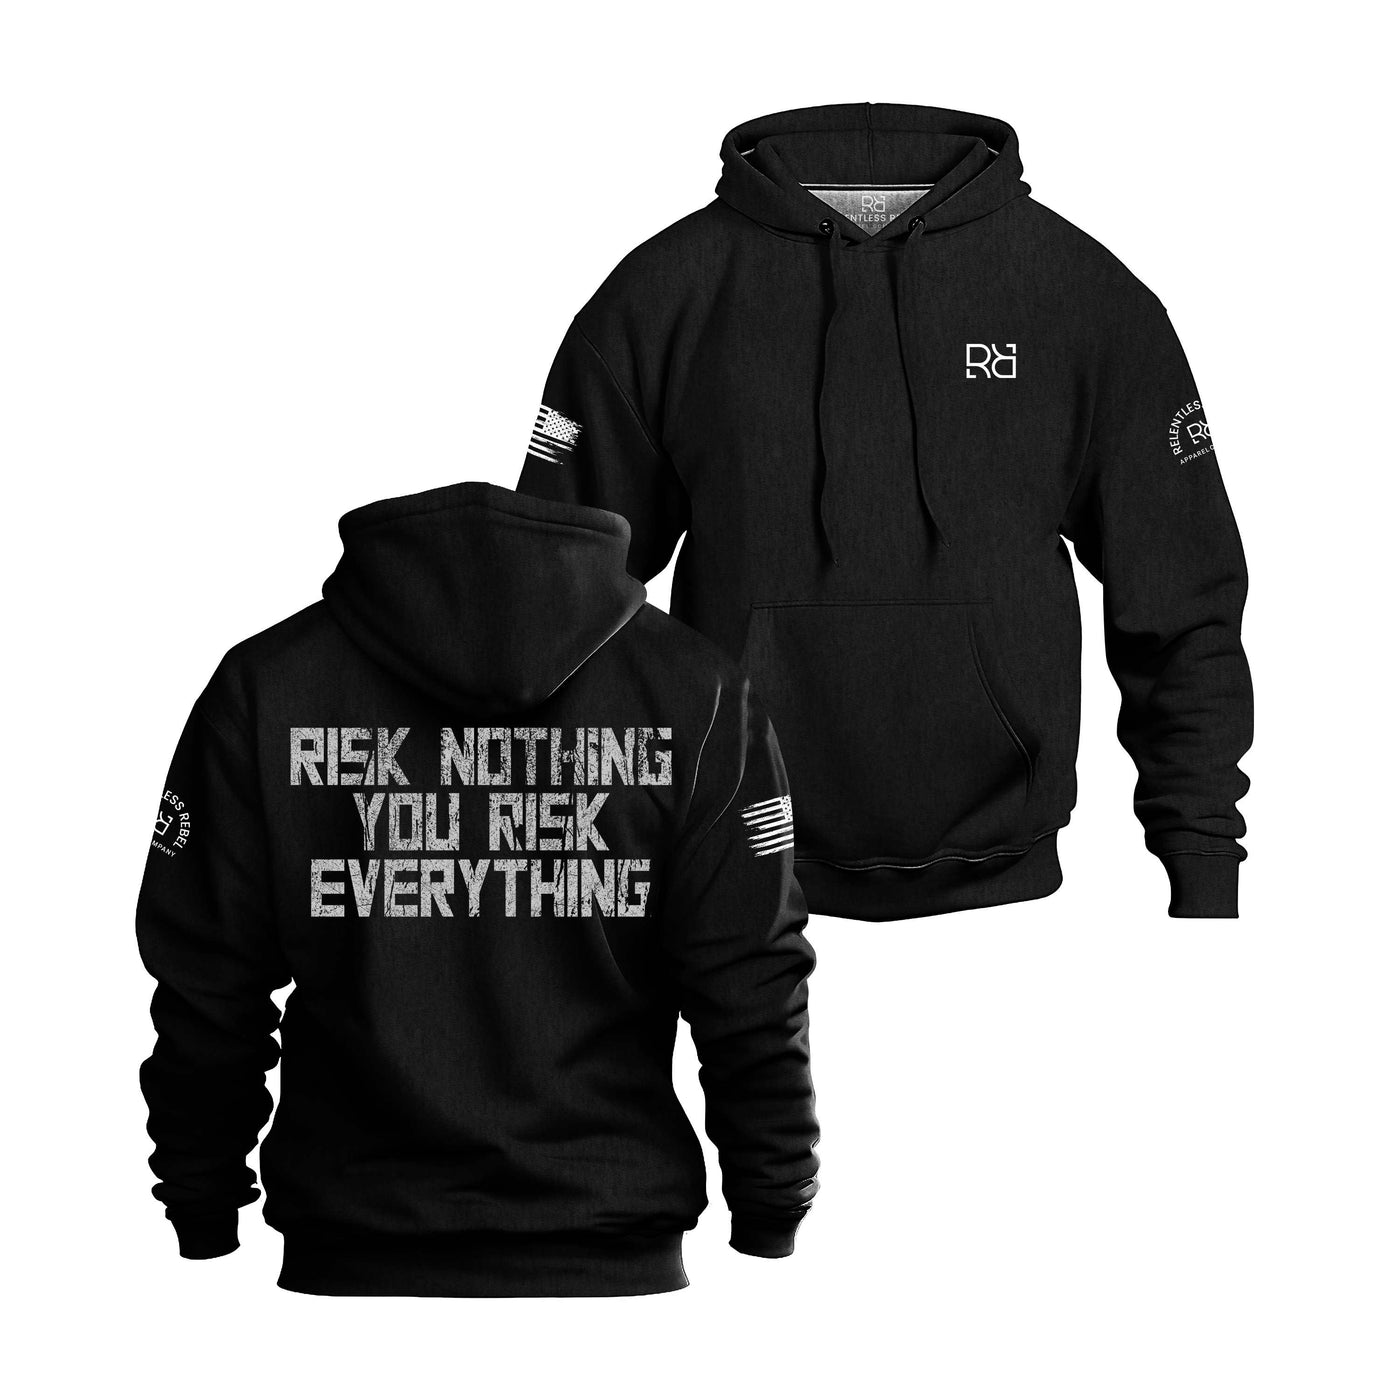 Risk Nothing You Risk Everything | Heavy Weight Men's Hoodie